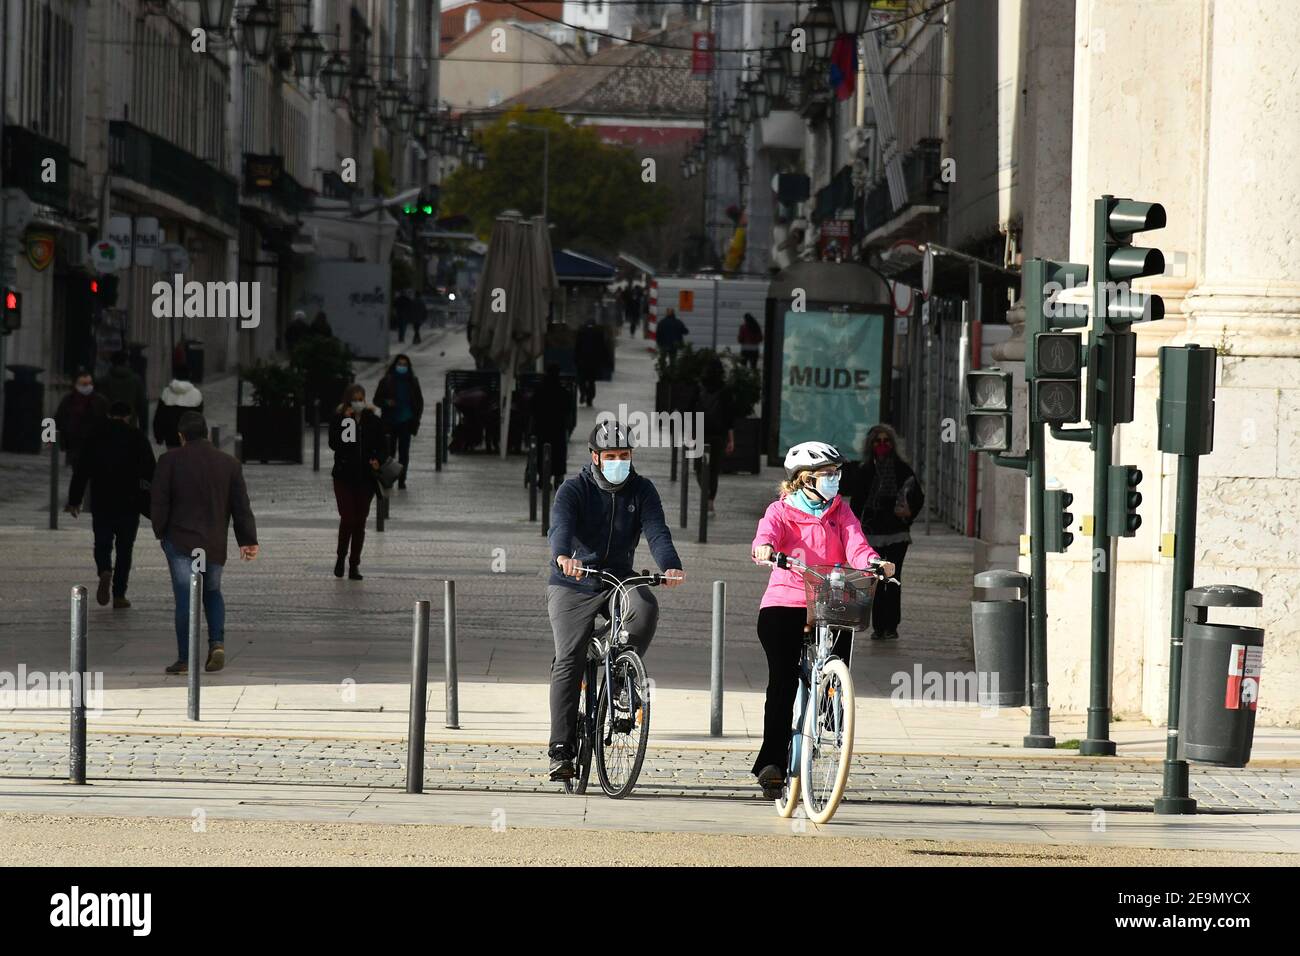 Two people wearing face masks ride bicycles near Praça de Comercio in Lisbon. Portugal has registered 13,740 deaths and 755,774 confirmed cases since the beginning of the pandemic according to the bulletin of the General Health Department (DGS). Stock Photo